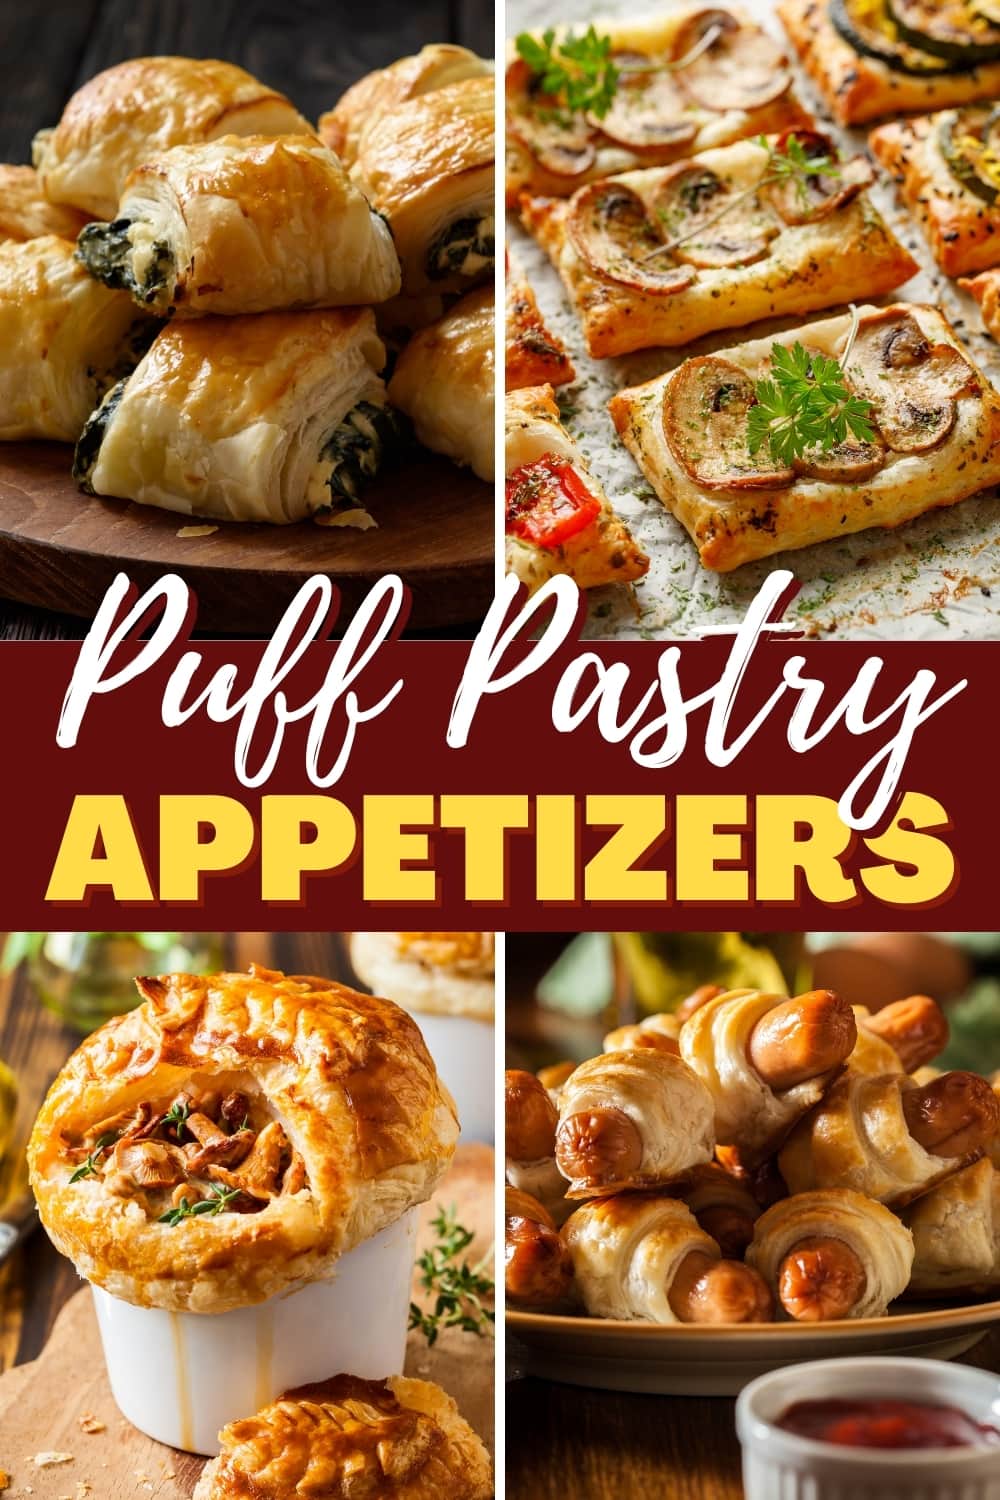 20 Puff Pastry Appetizers (+ Quick and Easy Recipes) - Insanely Good